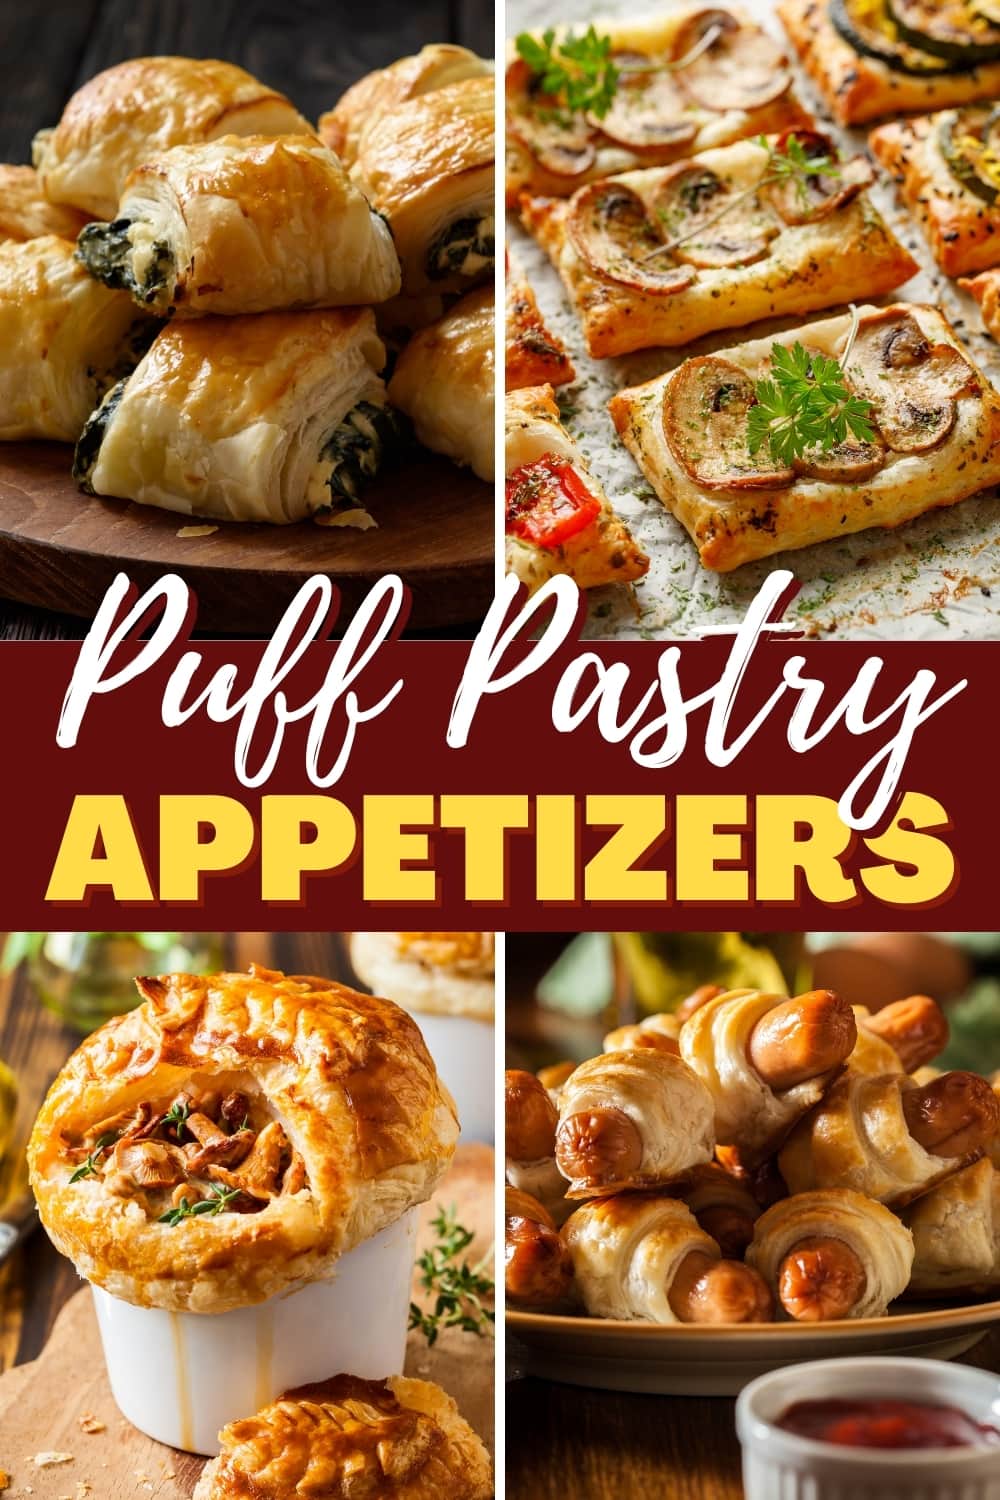 20 Puff Pastry Appetizers (+ Quick and Easy Recipes) - Insanely Good